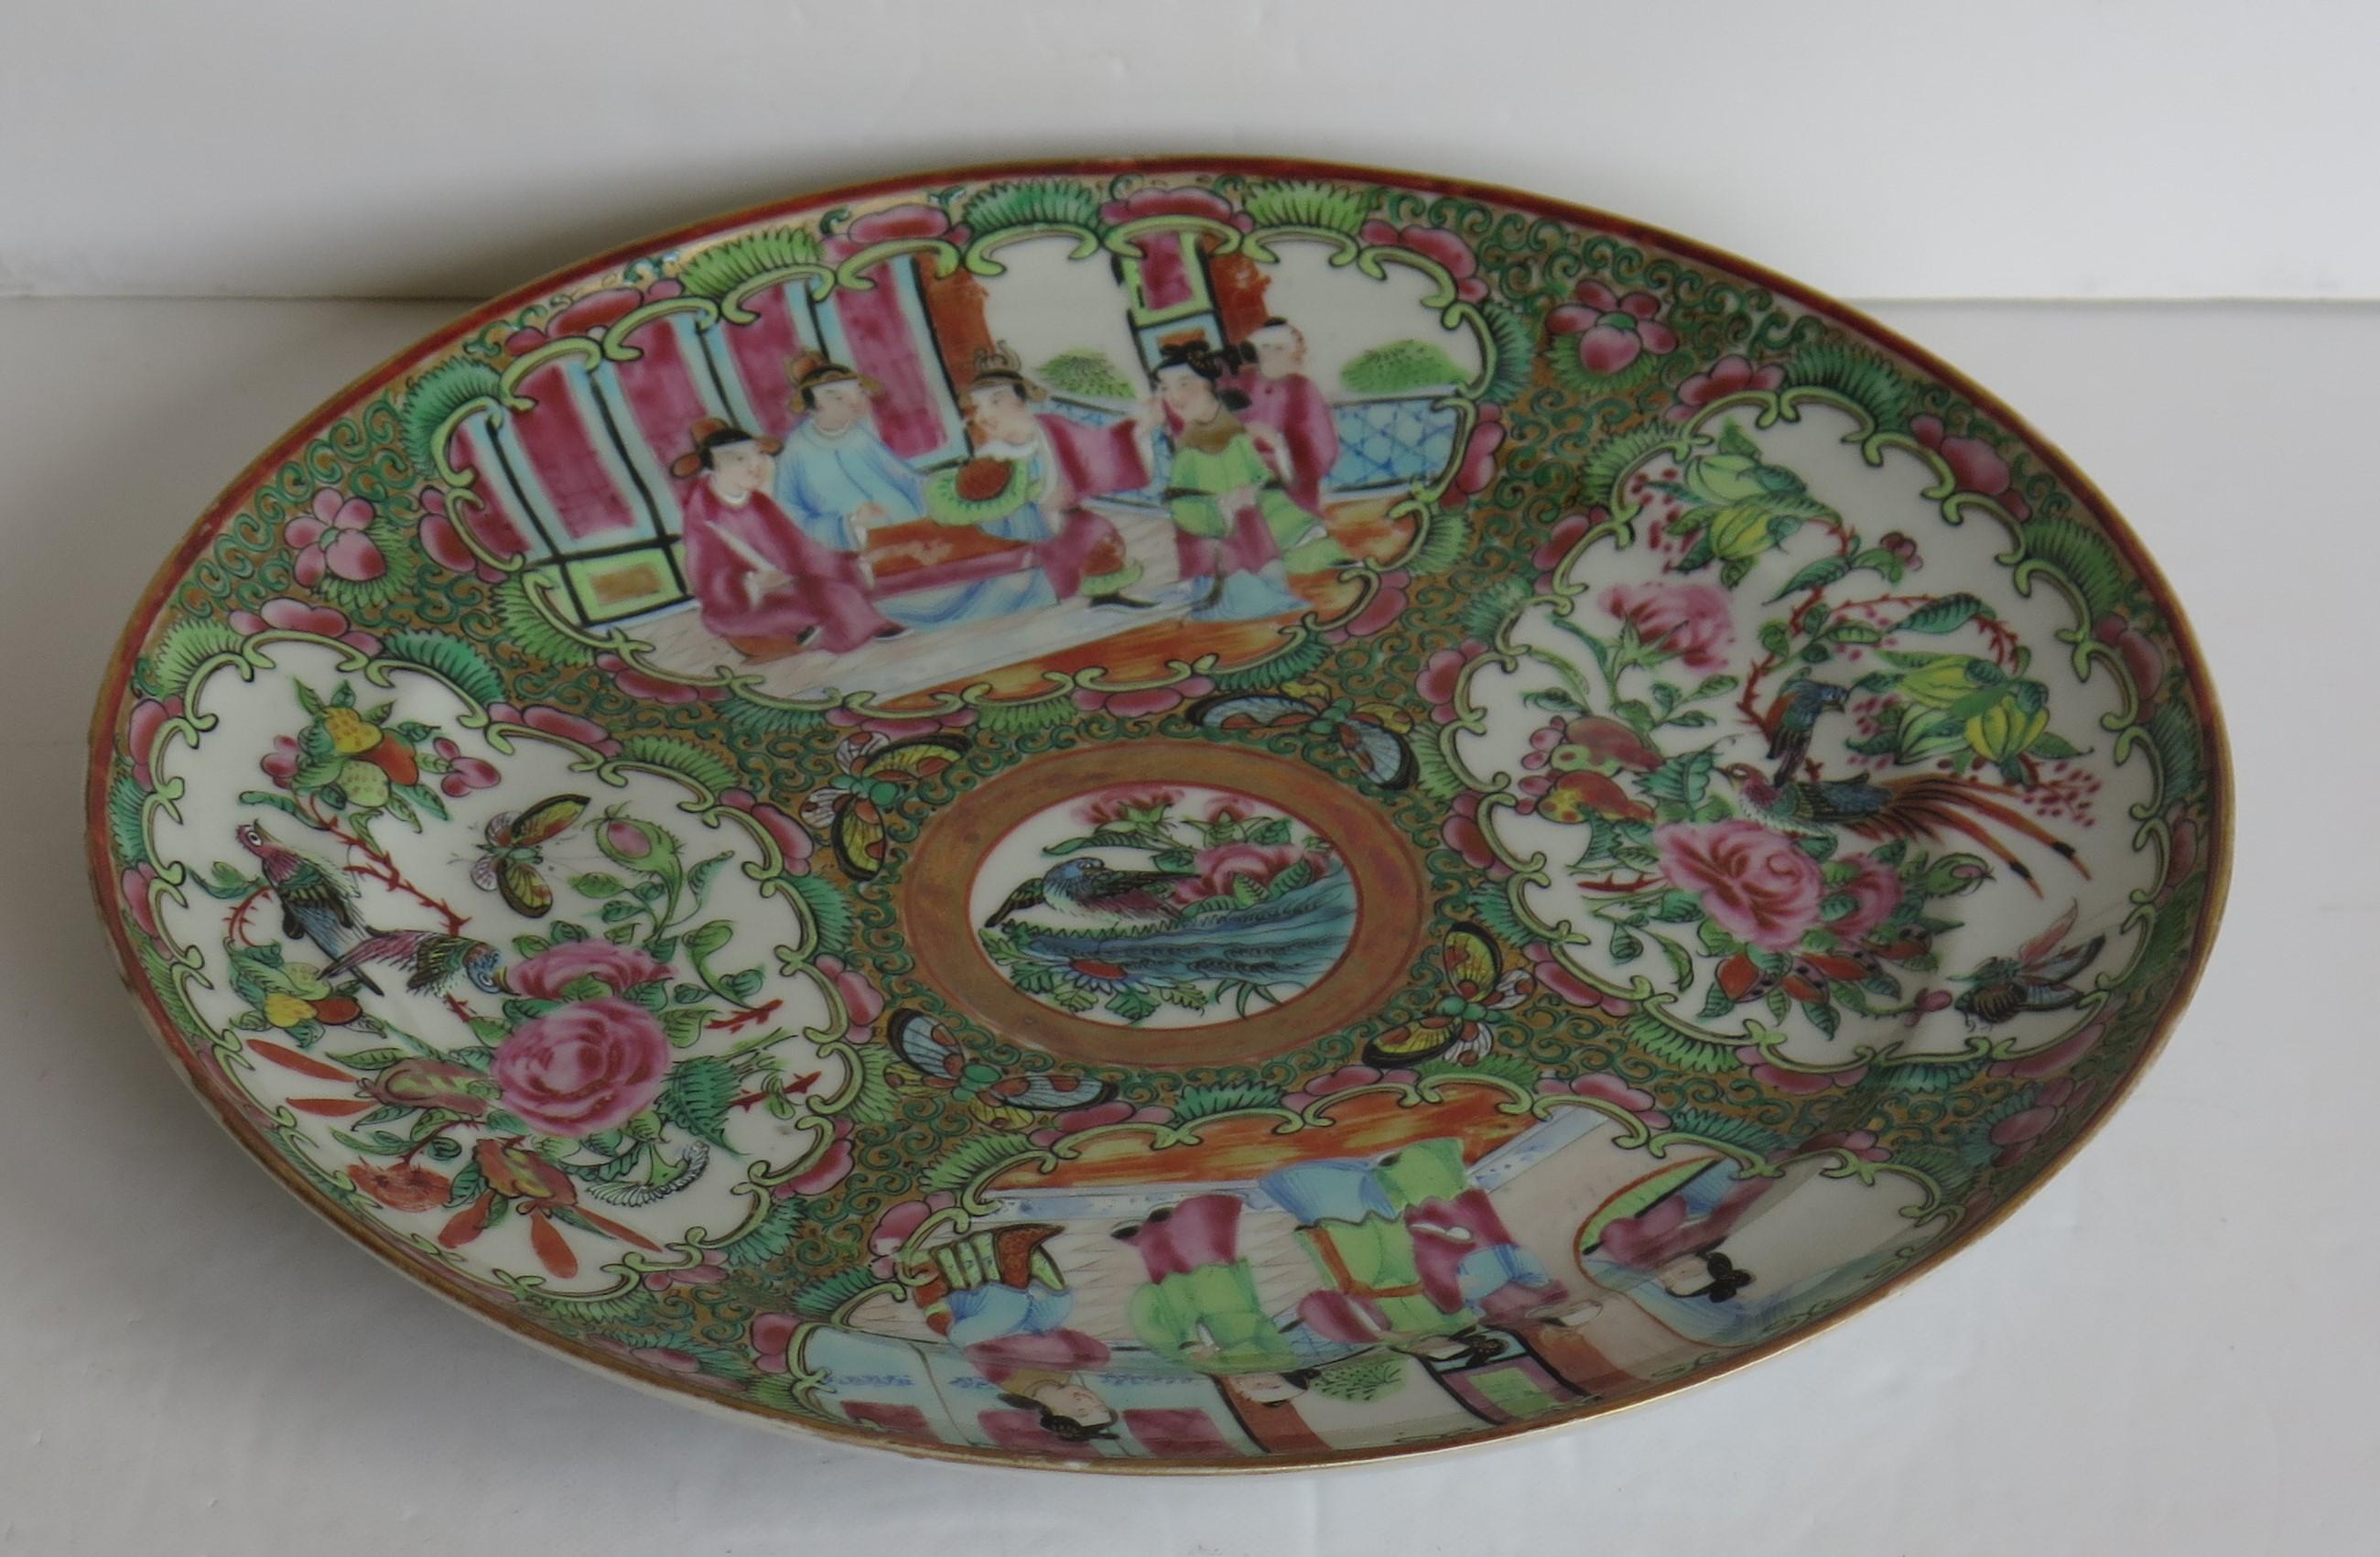 This is a very decorative, good quality Chinese export, porcelain, Rose Medallion Dinner Plate, which we date to the early 19th century, Qing dynasty, circa 1820.

The dinner plate is well potted with a central well and a fairly large diameter of